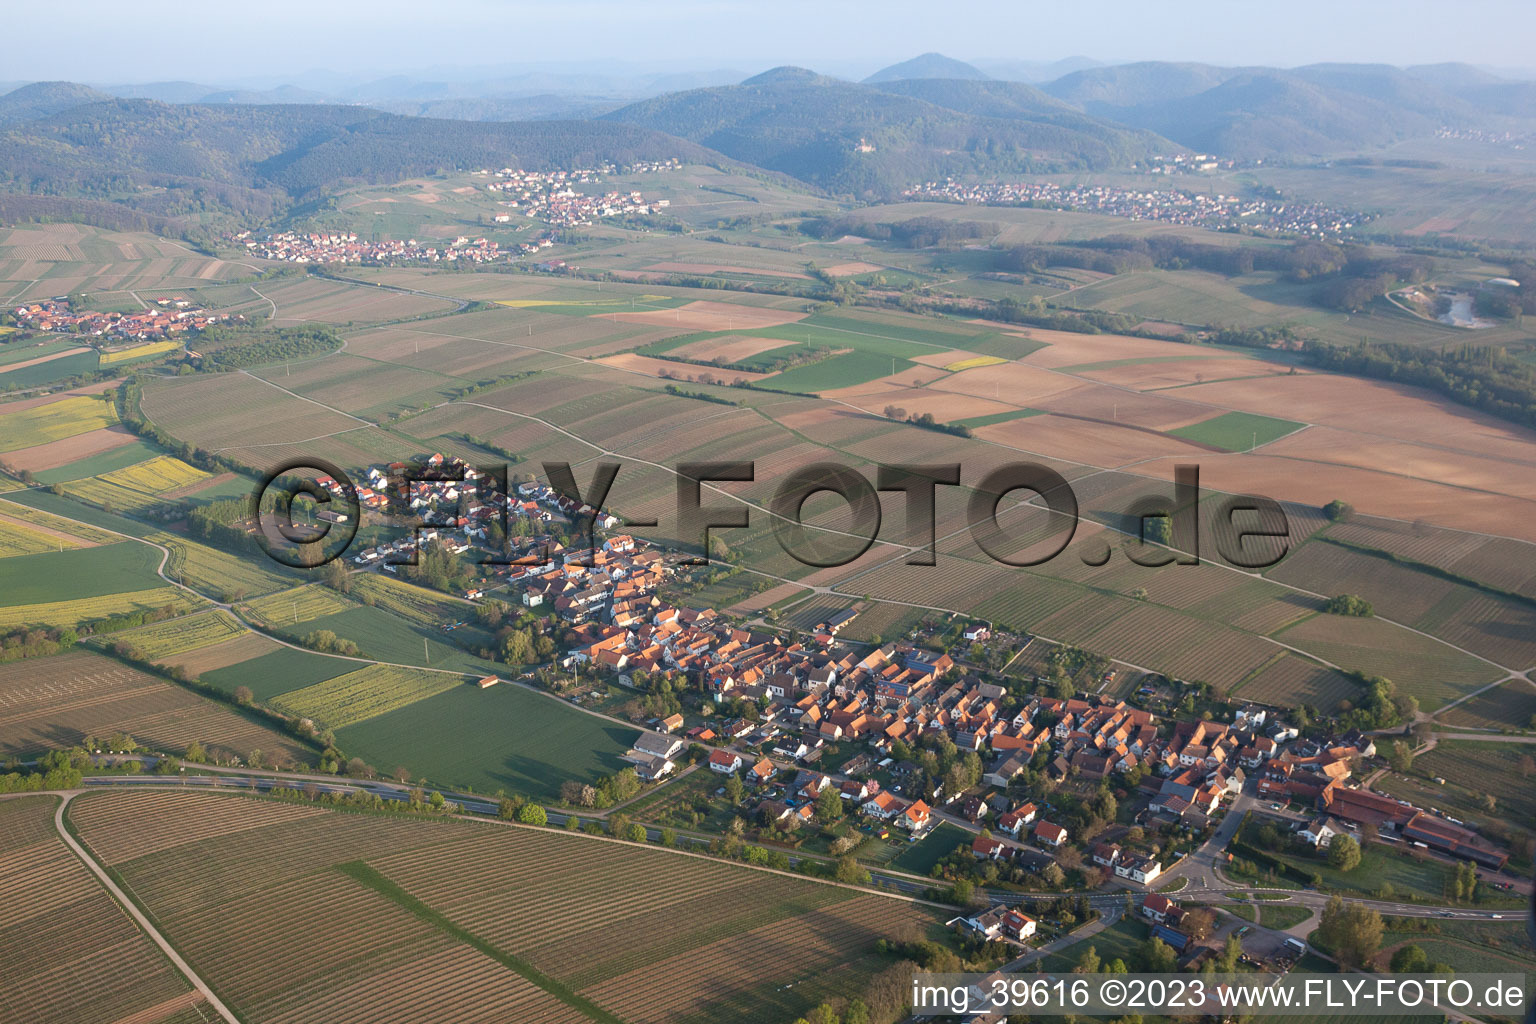 Aerial photograpy of Niederhorbach in the state Rhineland-Palatinate, Germany